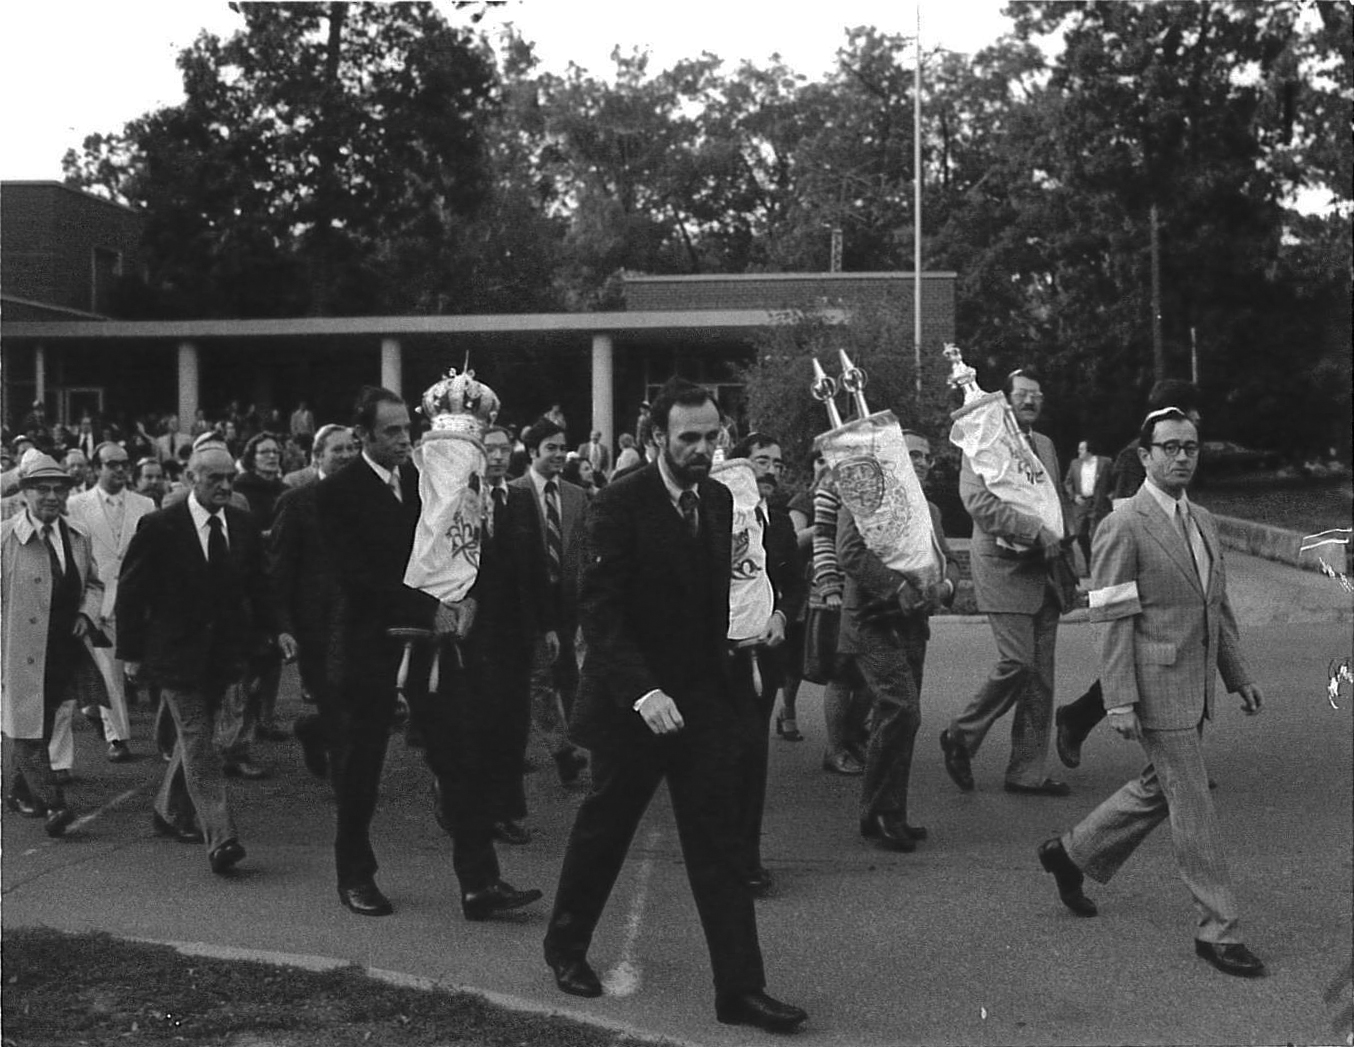 Marching the Torahs from the 1429 Hill building to the new synagogue at 2000 Washtenaw. Rabbi Alan Kensky on the left, Henry Gershowitz on the right. Erev Rosh HaShanah 1978.